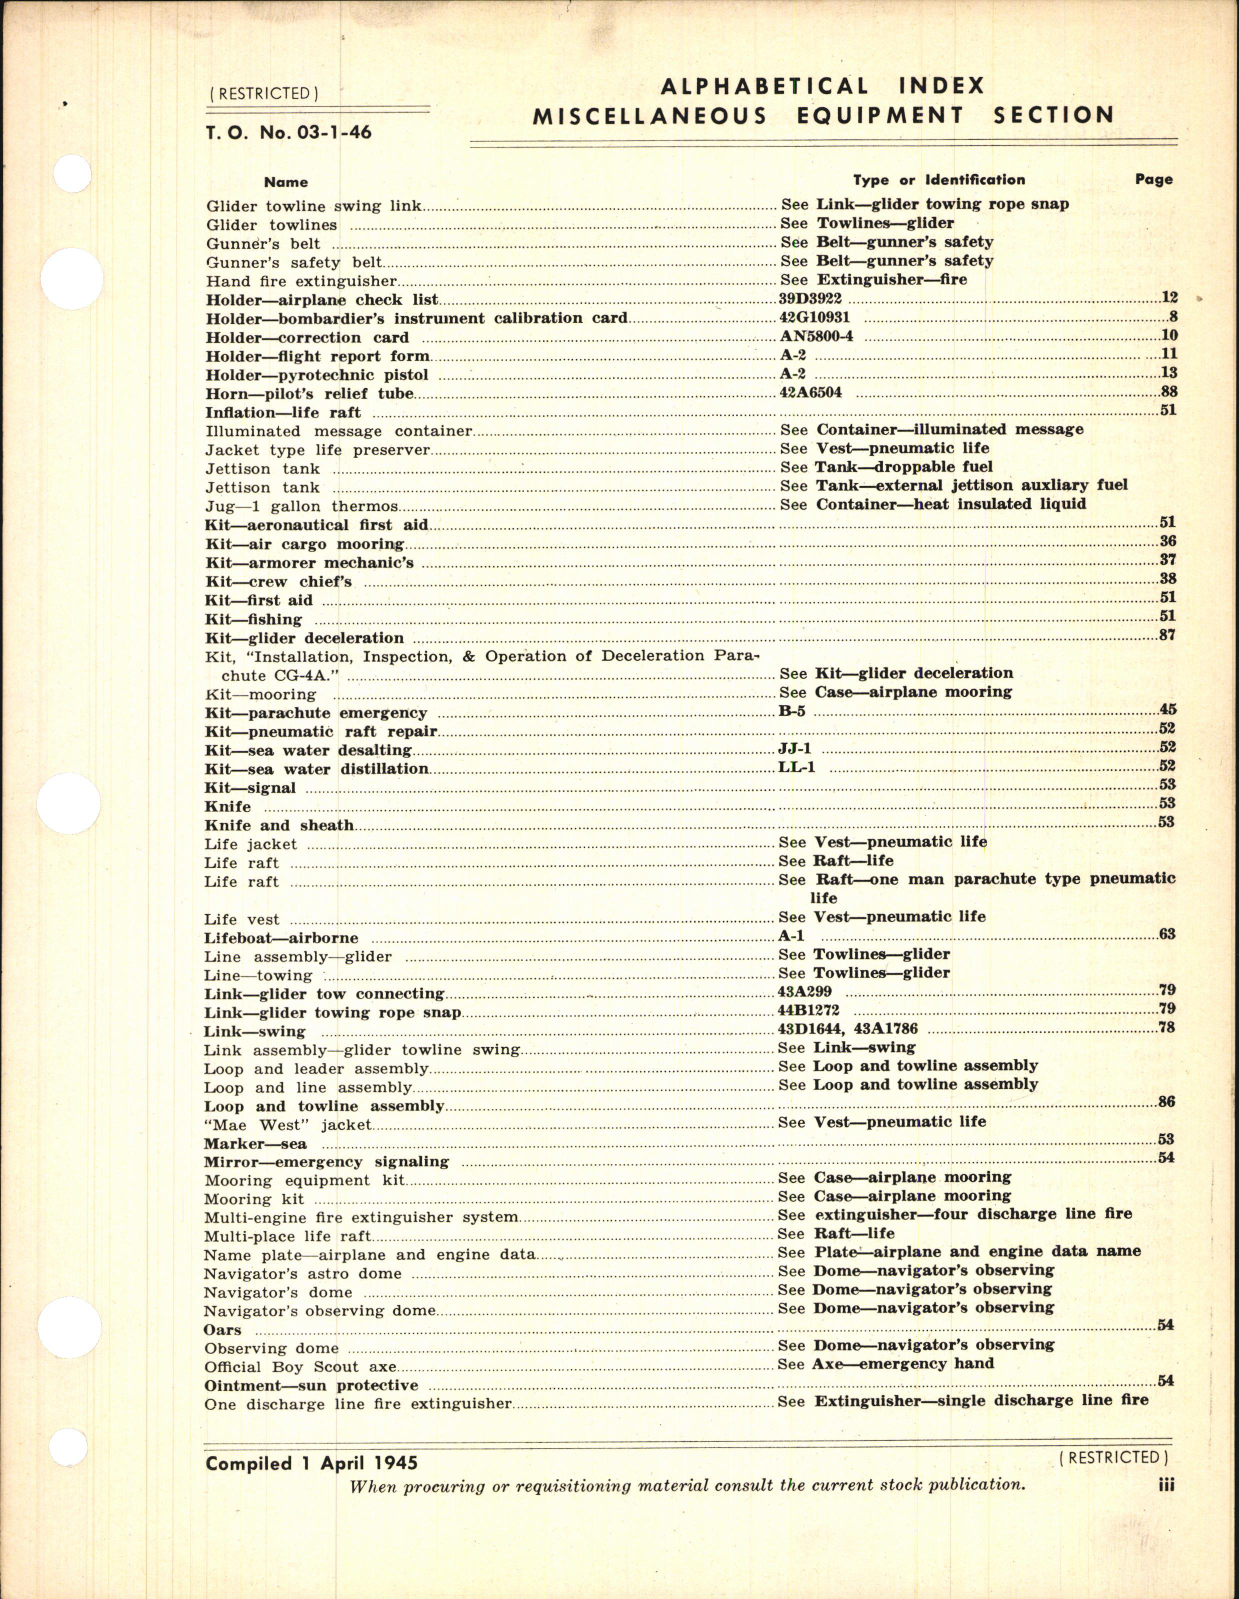 Sample page 5 from AirCorps Library document: Index of Army-Navy Aeronautical Equipment - Miscellaneous